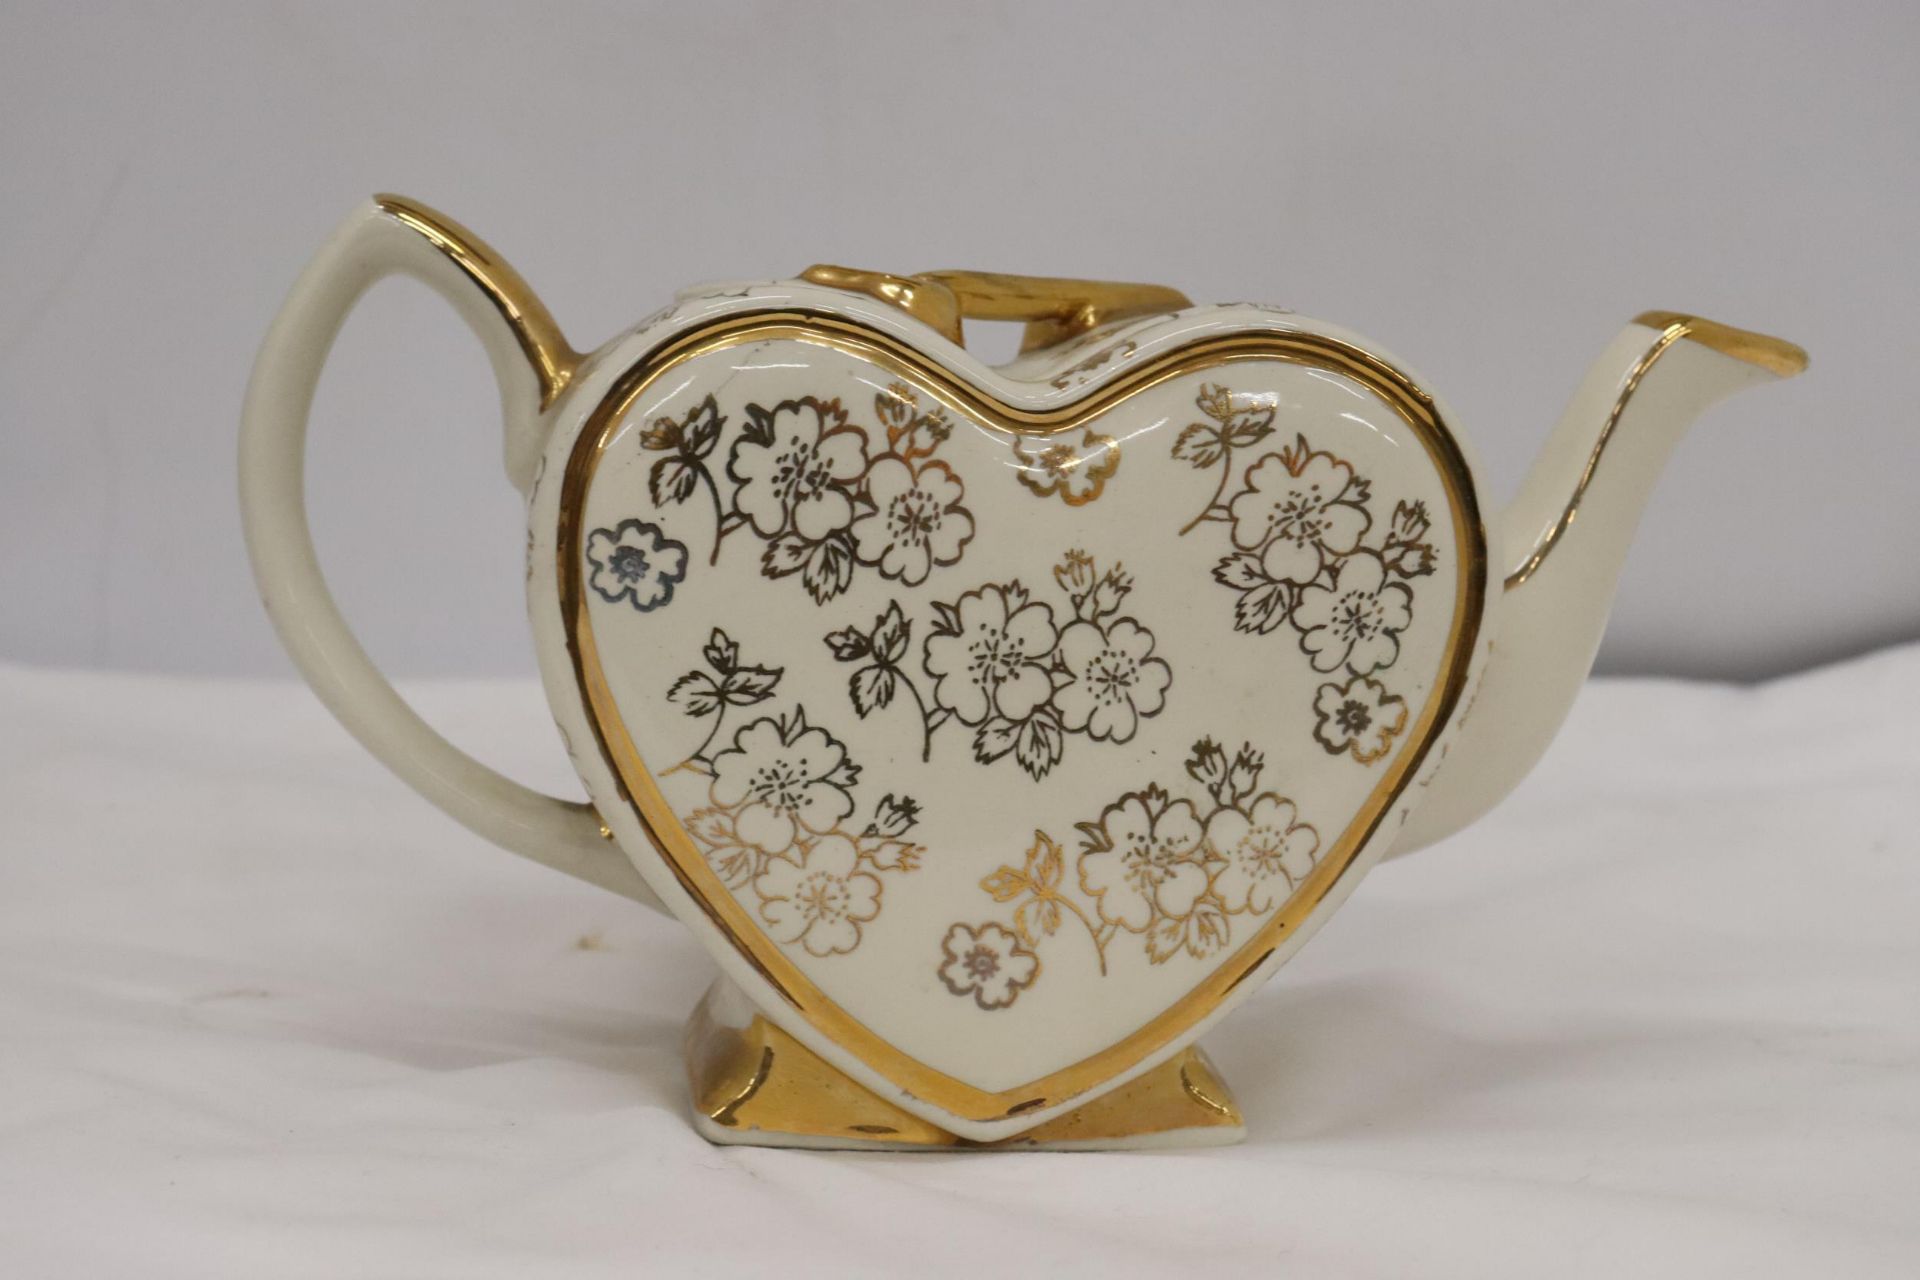 A VINTAGE HEARTSHAPED TEAPOT LINGARD WEBSTER "KEY TO MY HEART" - Image 3 of 6